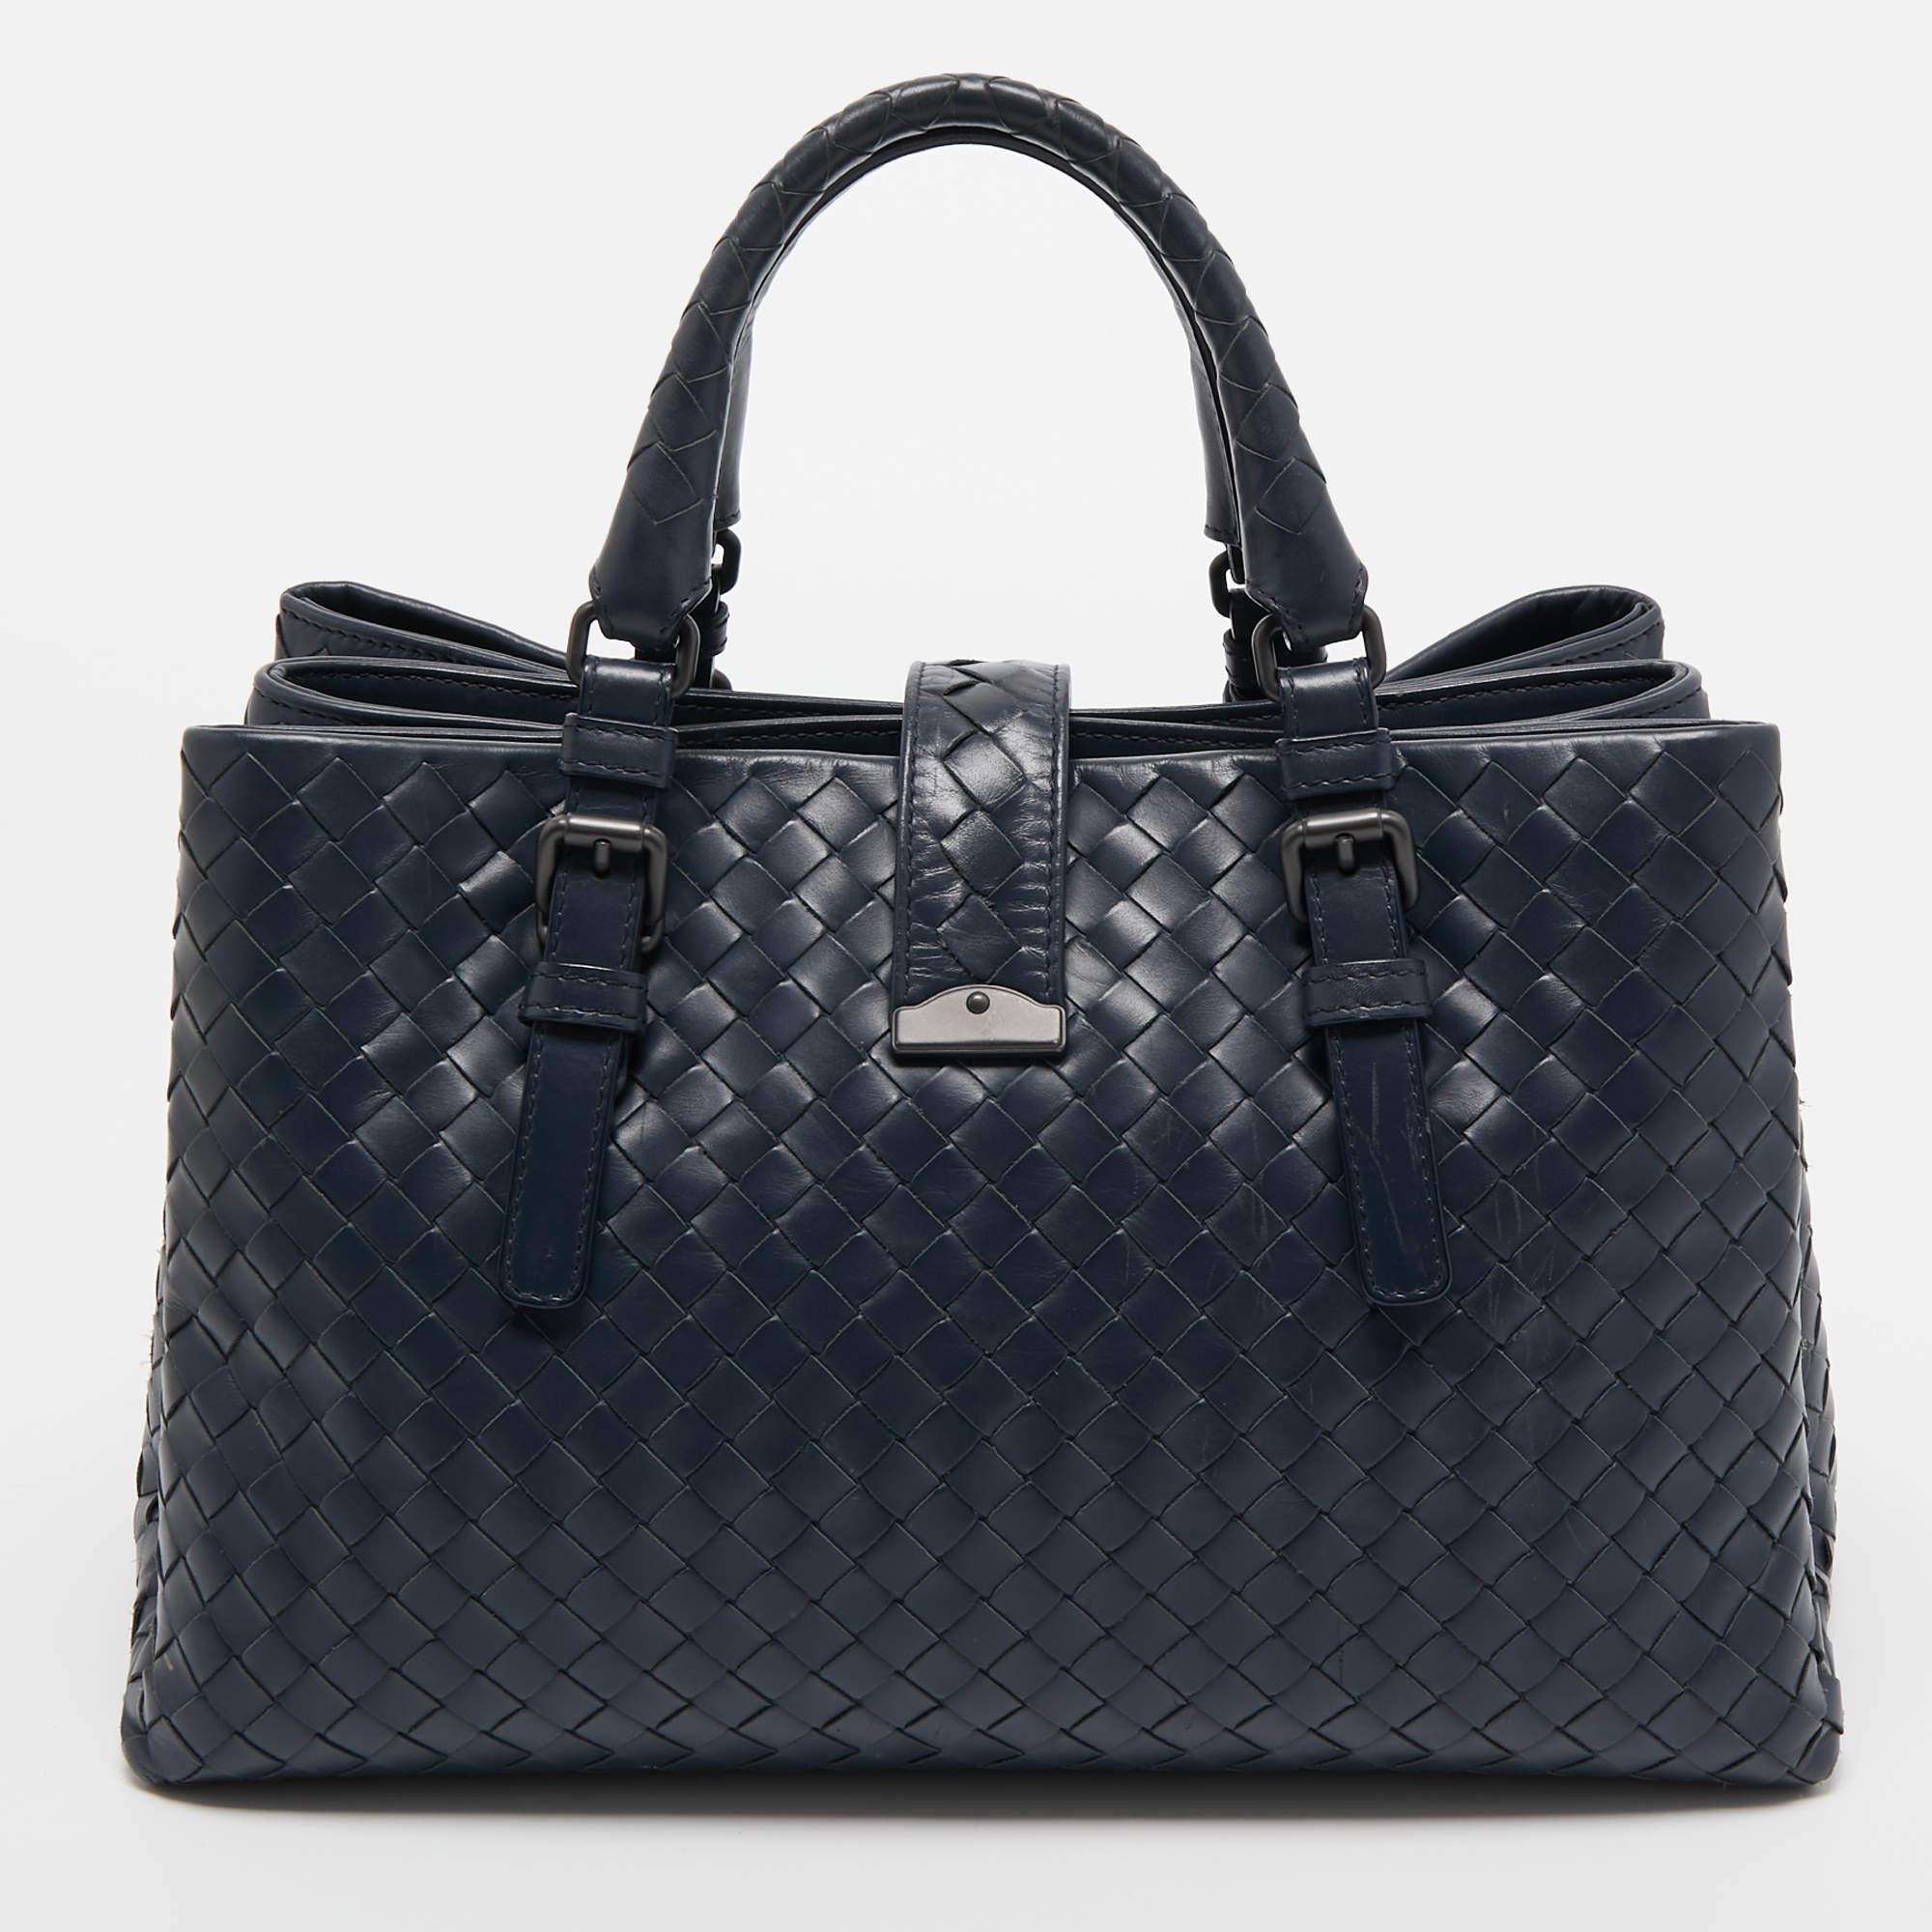 Bottega Veneta's Roma tote is a timeless addition to your accessory edit. The bag is beautifully woven using its intrecciato technique that strengthens the leather. This tote opens to roomy suede compartments and a zipped compartment for smaller